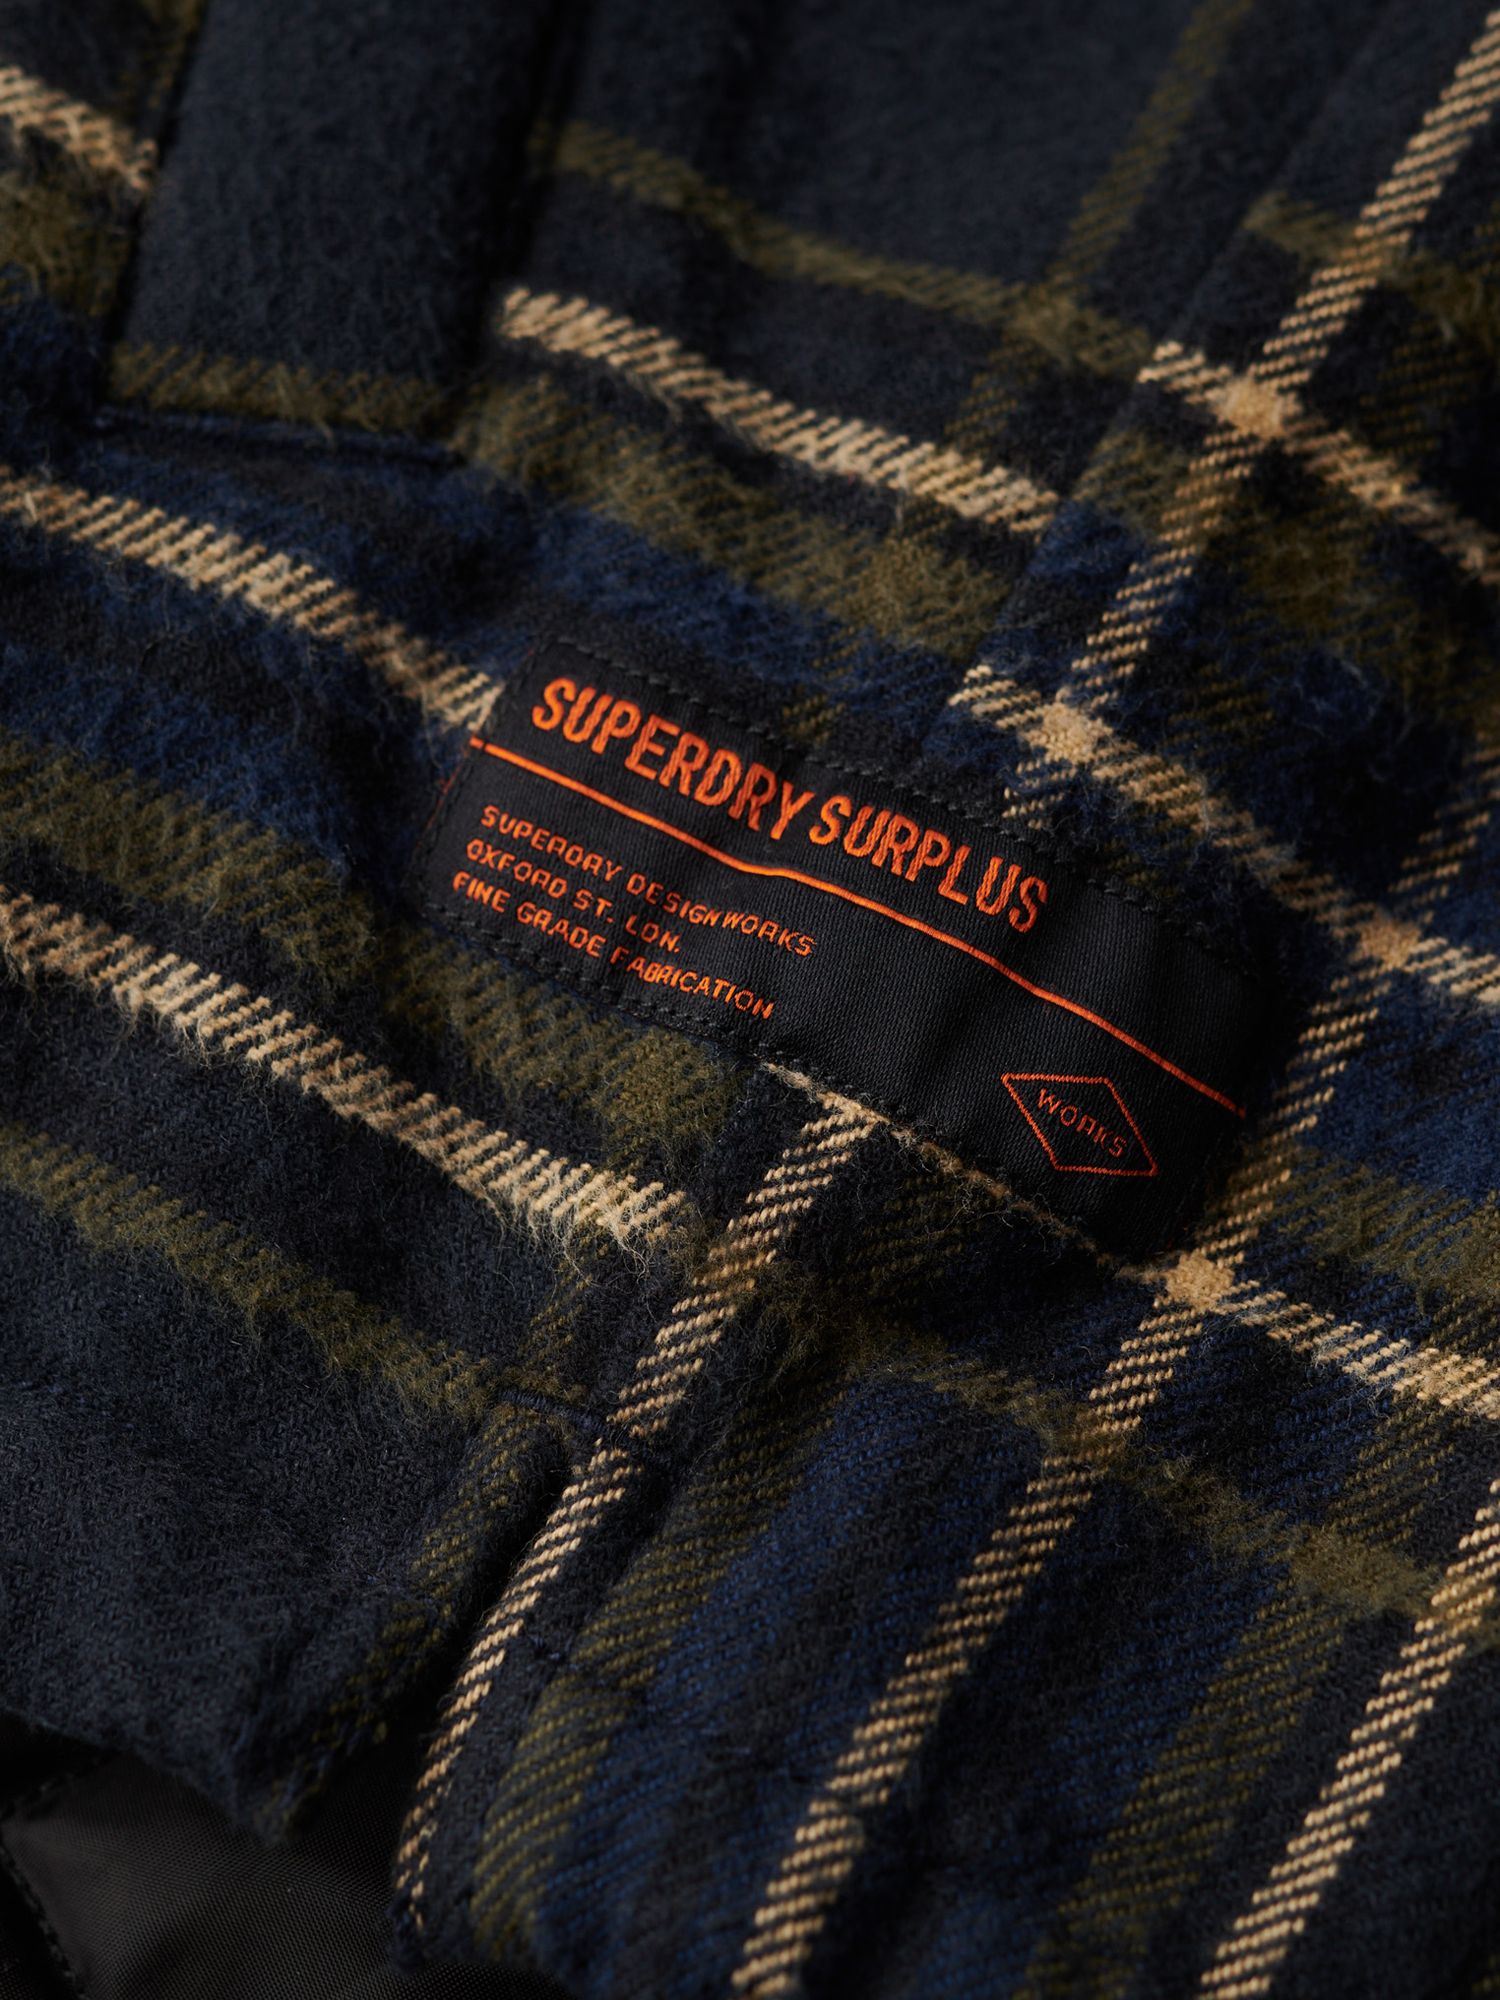 Superdry Surplus Large Check Overshirt, Navy, S